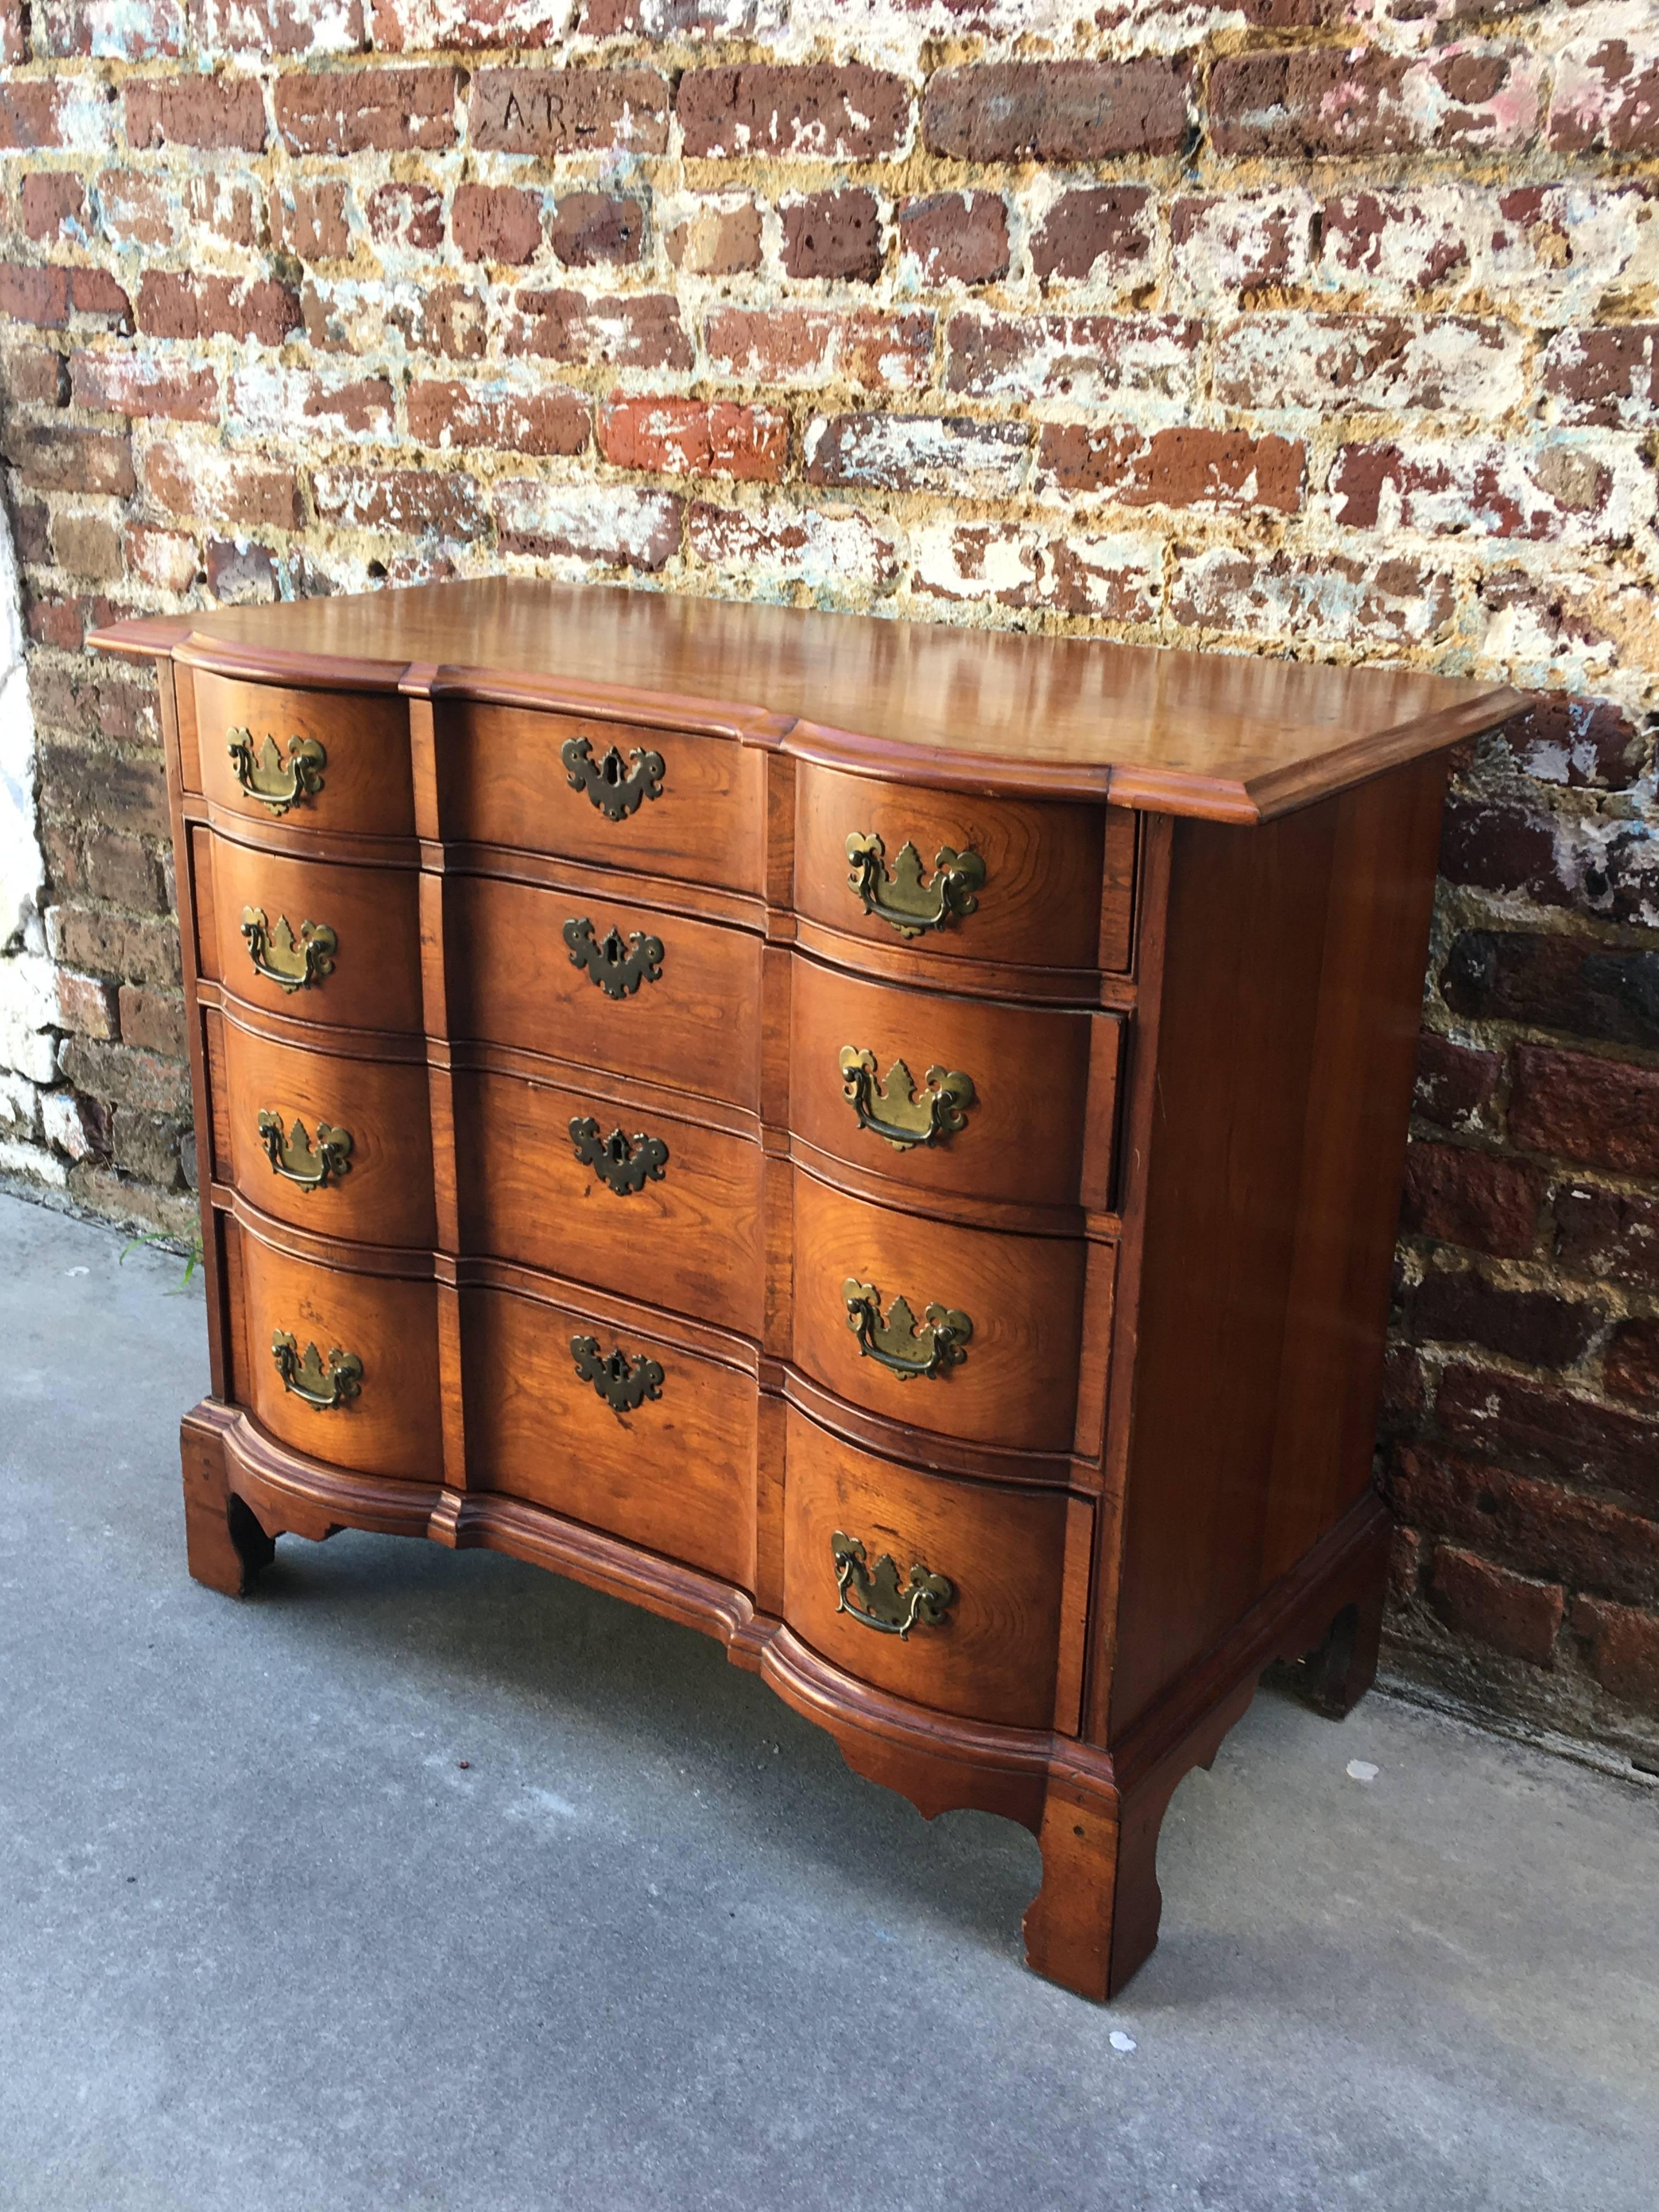 Mid-18th Century American Block Front Diminutive Applewood Chest of Drawers